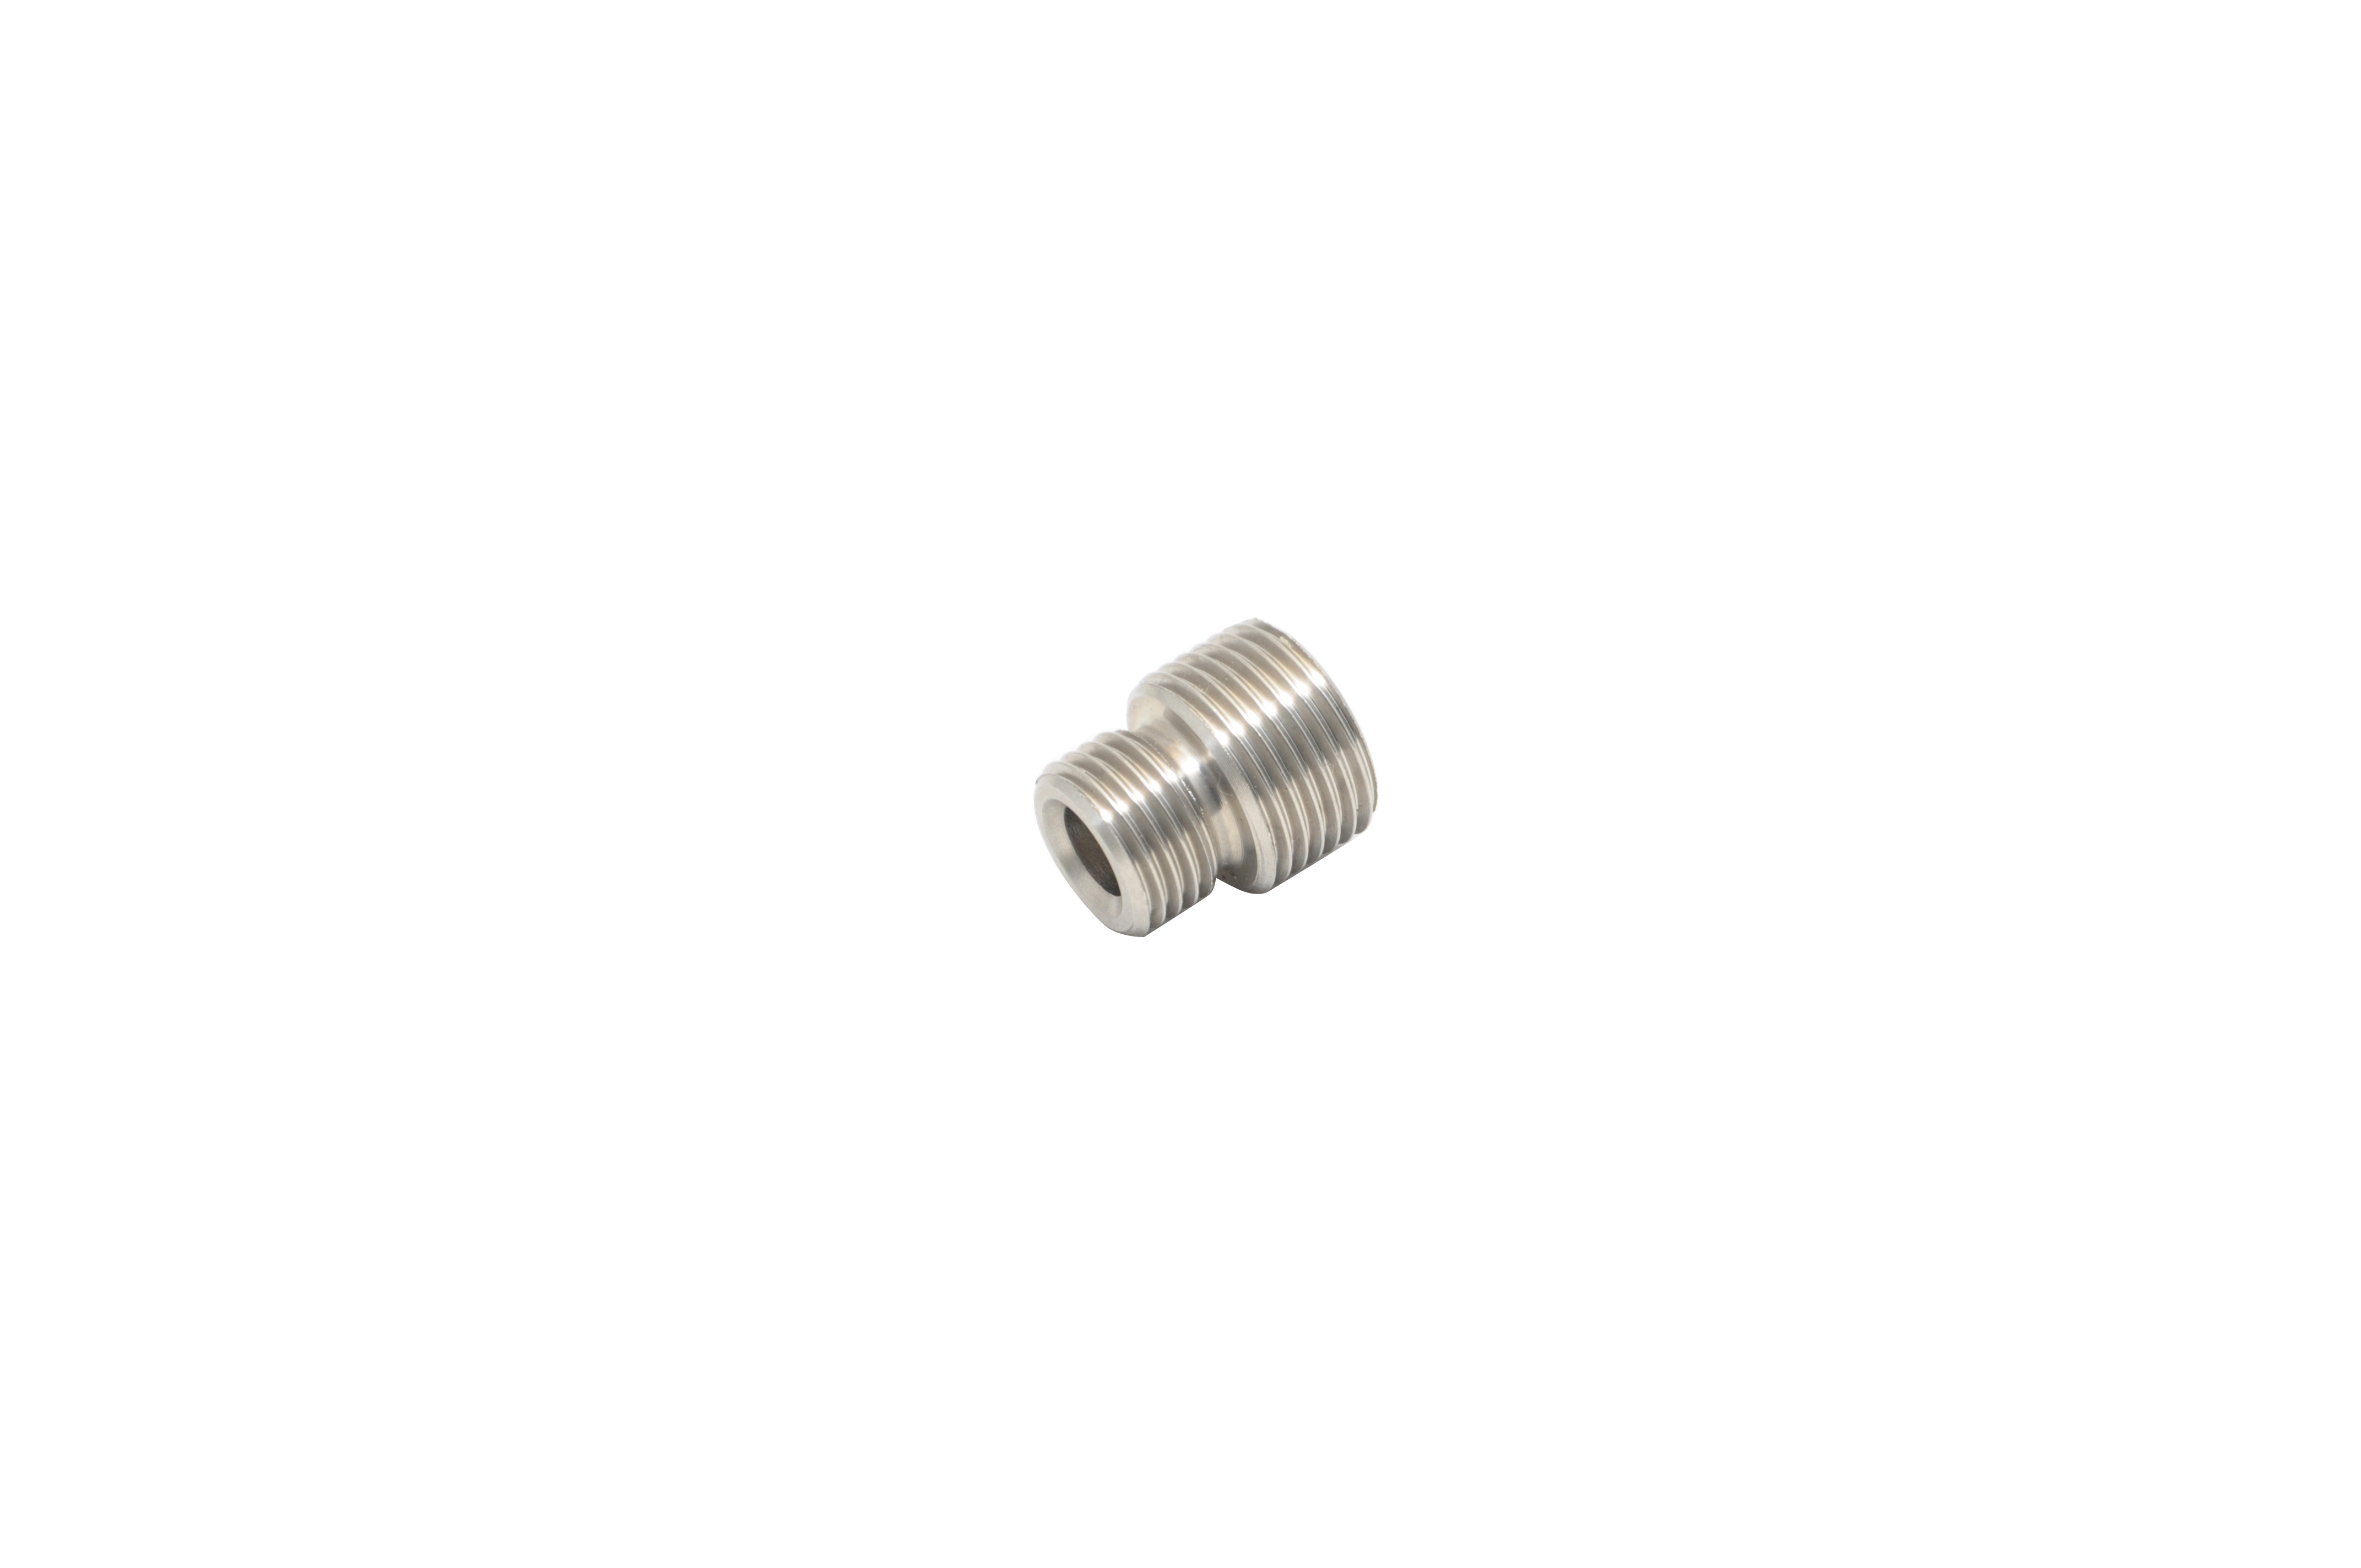 Adapter 1/4 inch ET to 3/4 inch ET stainless steel